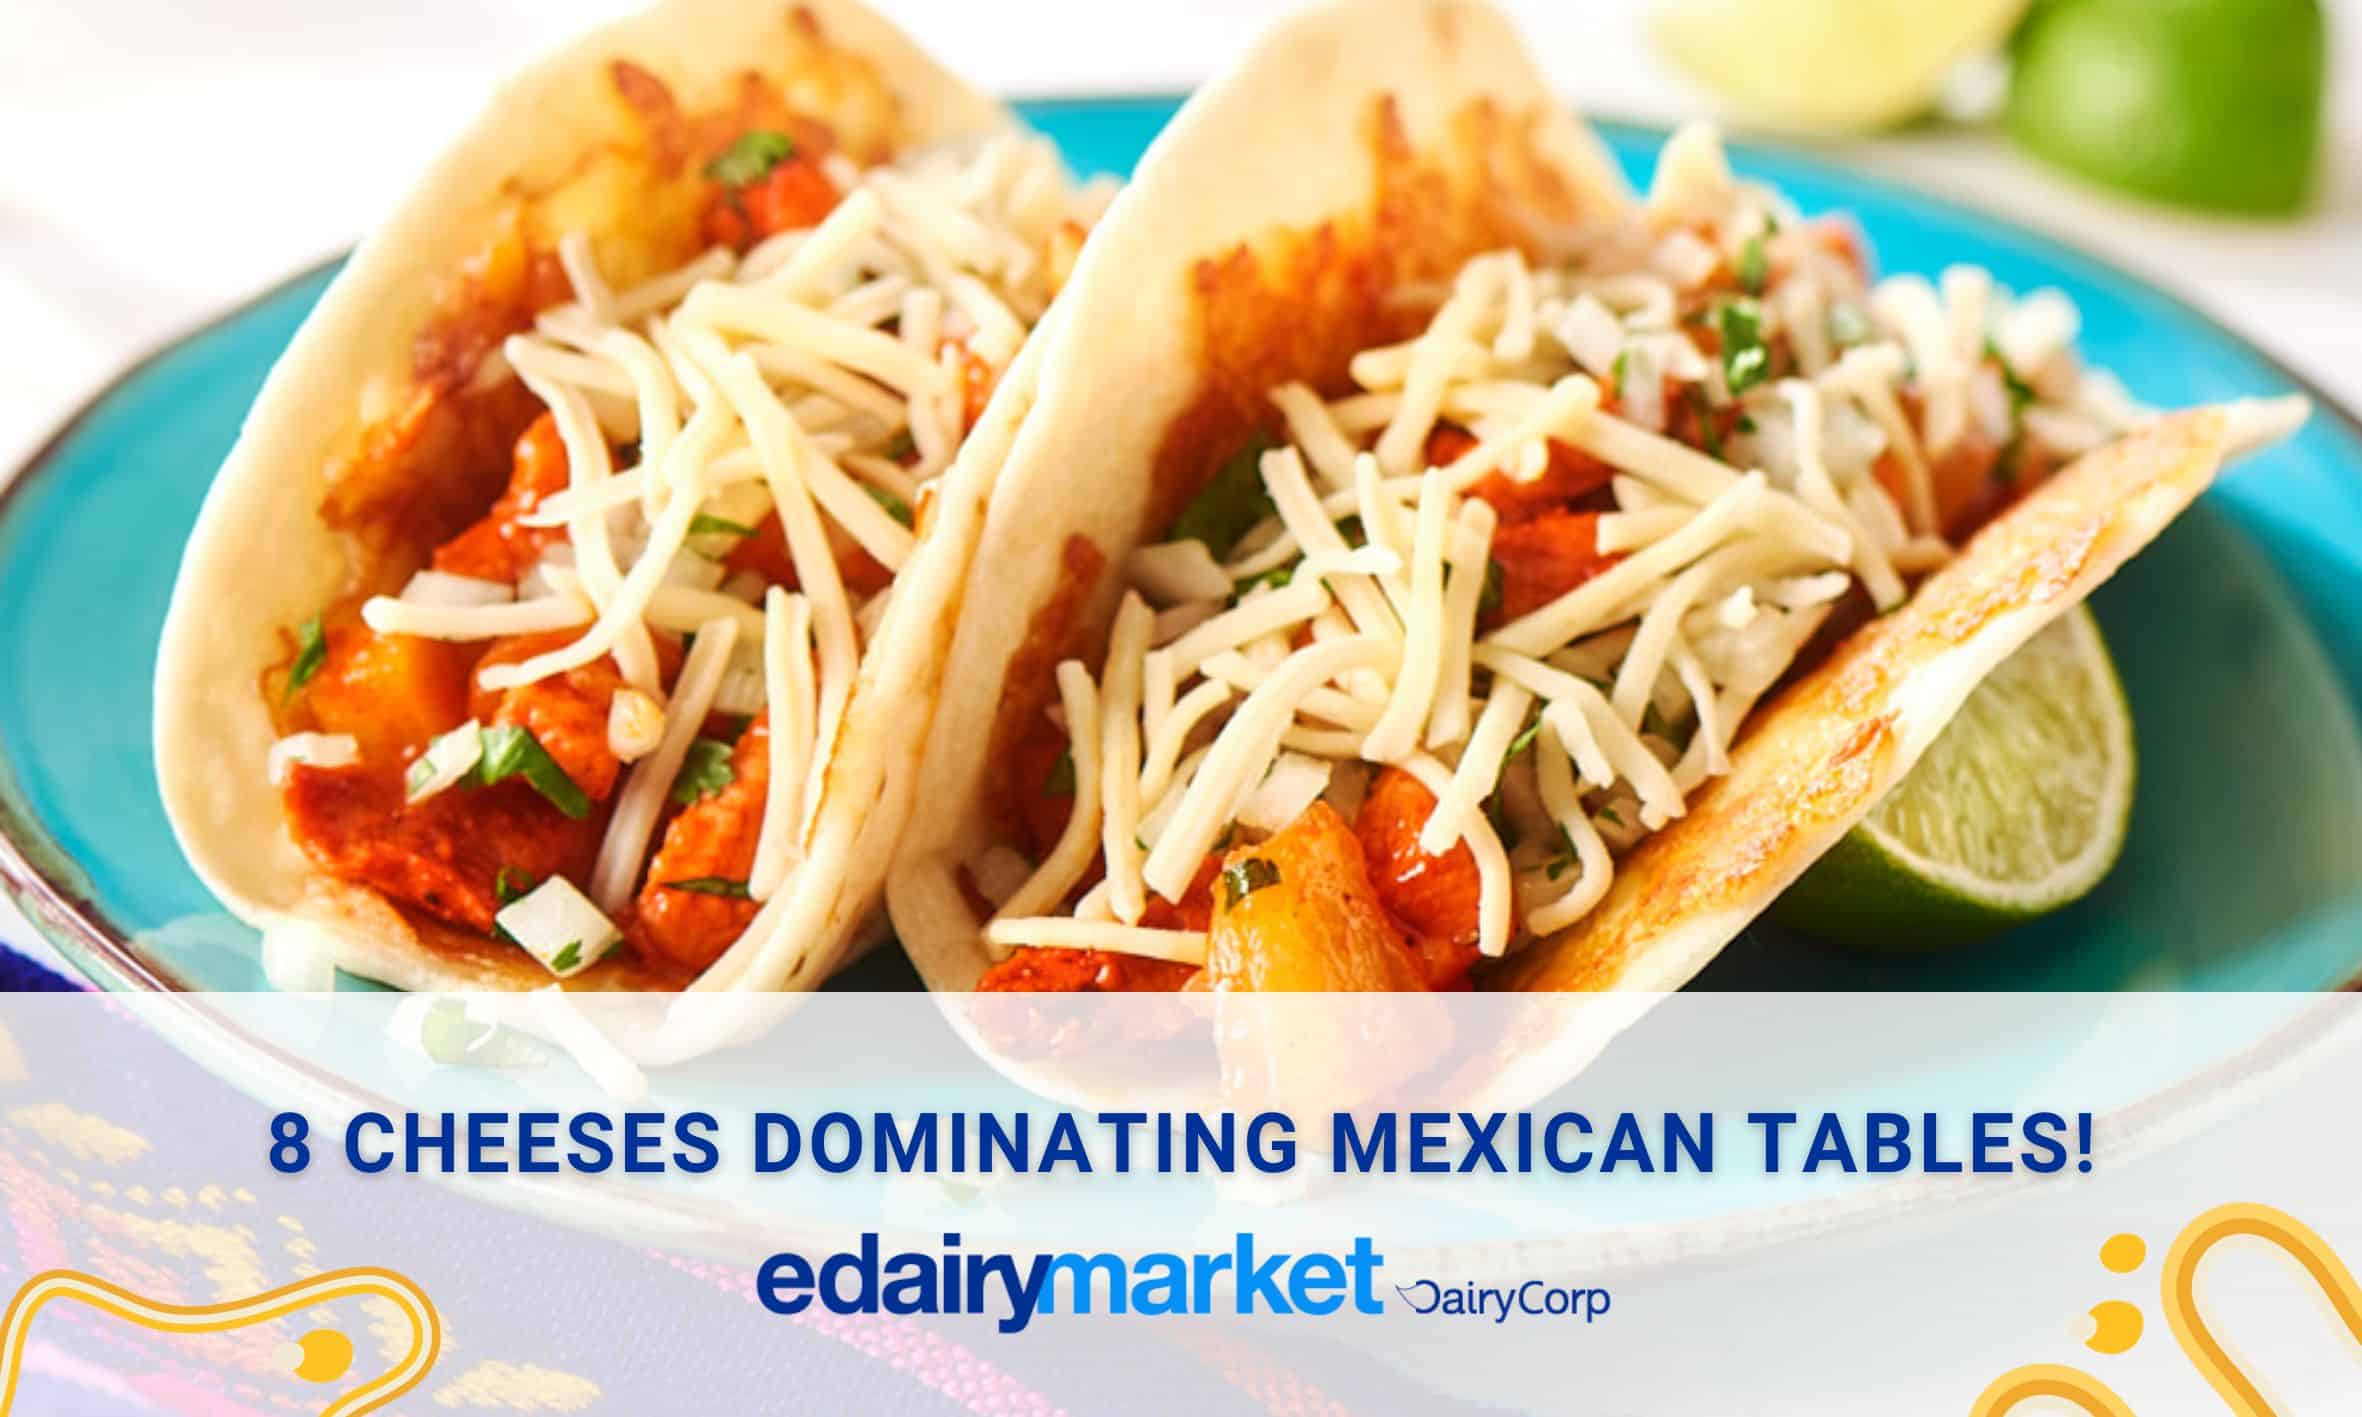 8 cheeses dominating Mexican tables!